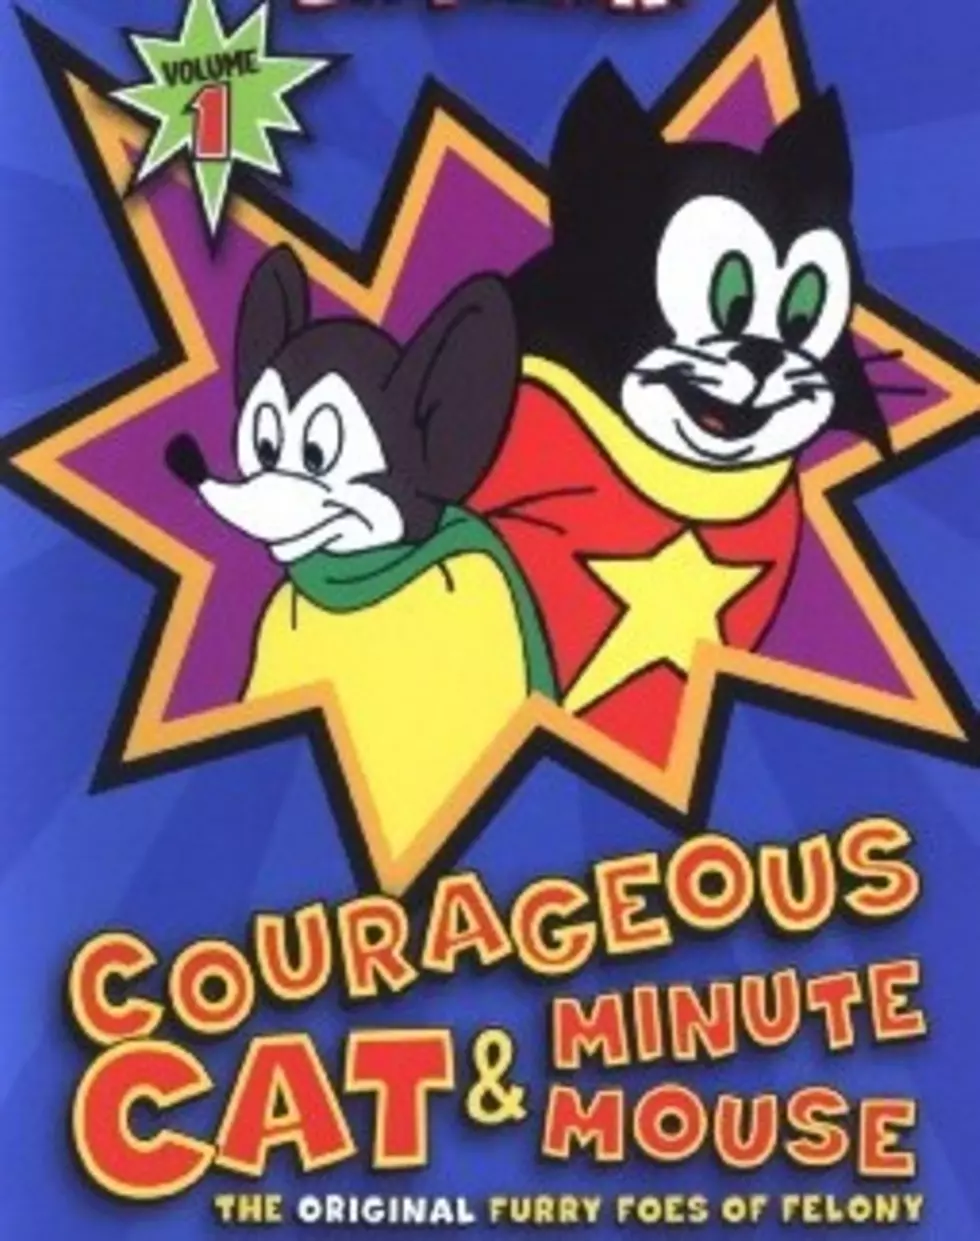 Throwback Thursday – Courageous Cat and Minute Mouse.